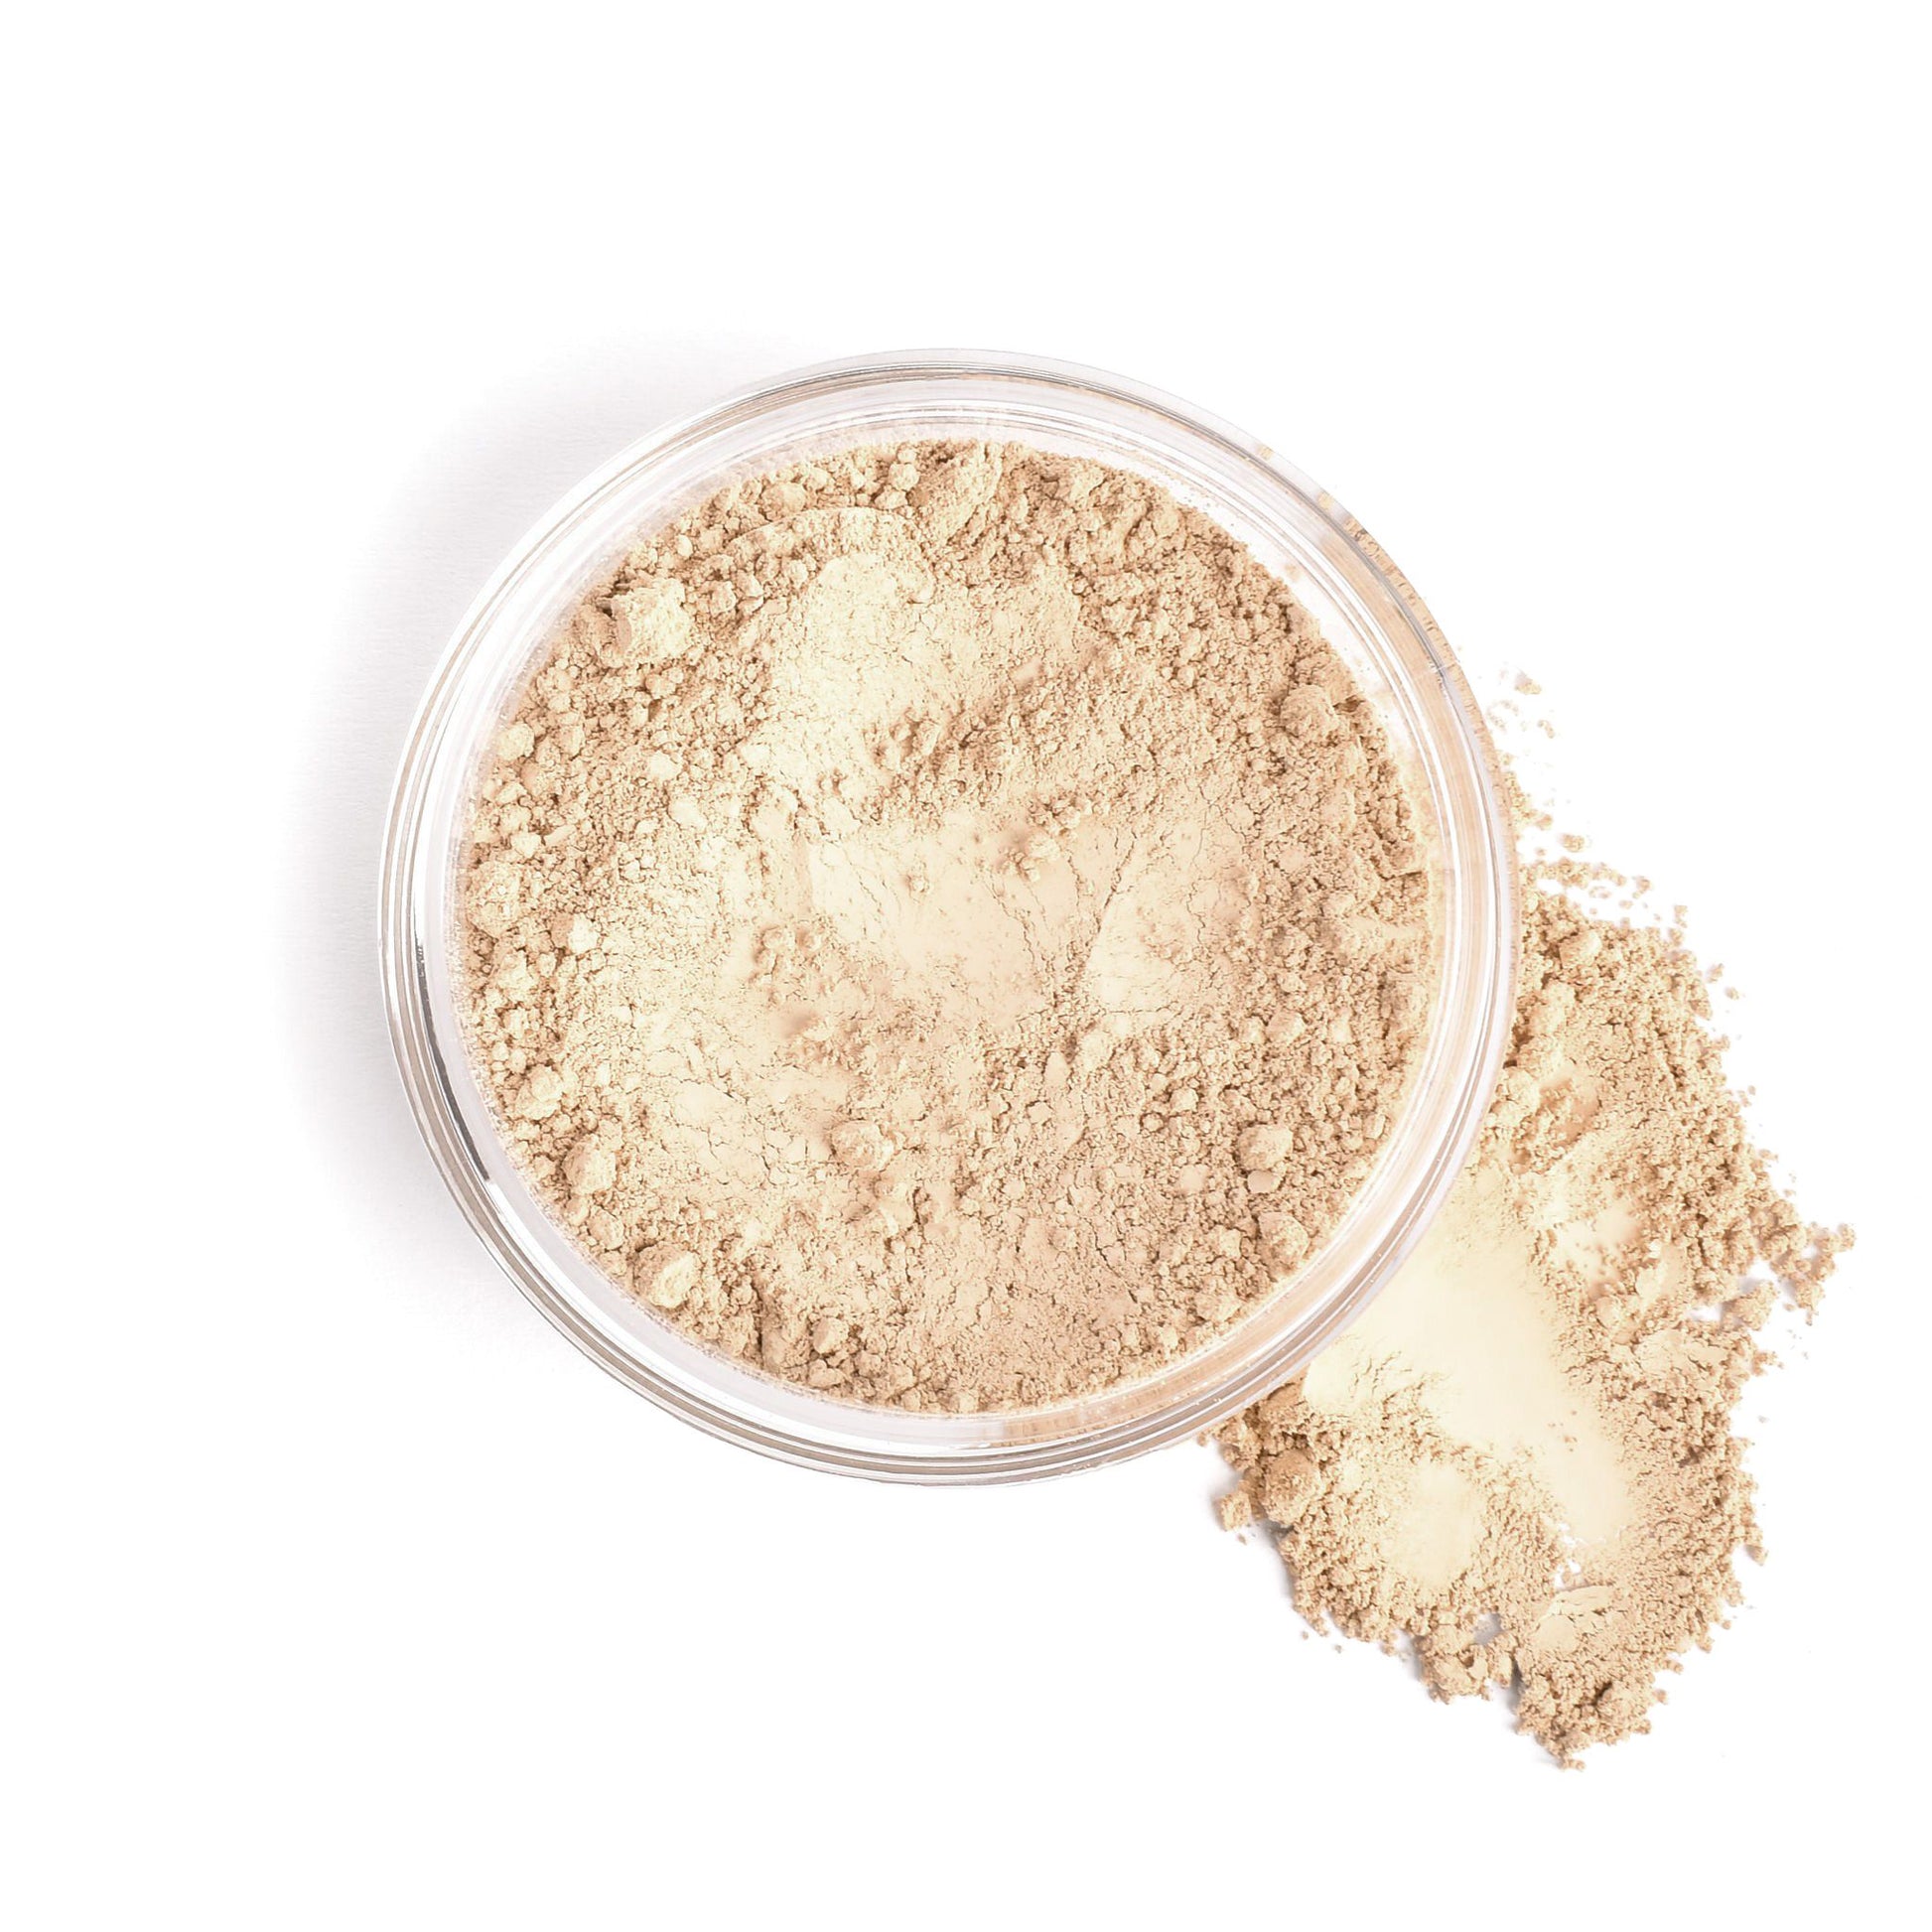 Loose-Mineral-Foundation-container-for-oily-skin-makeup